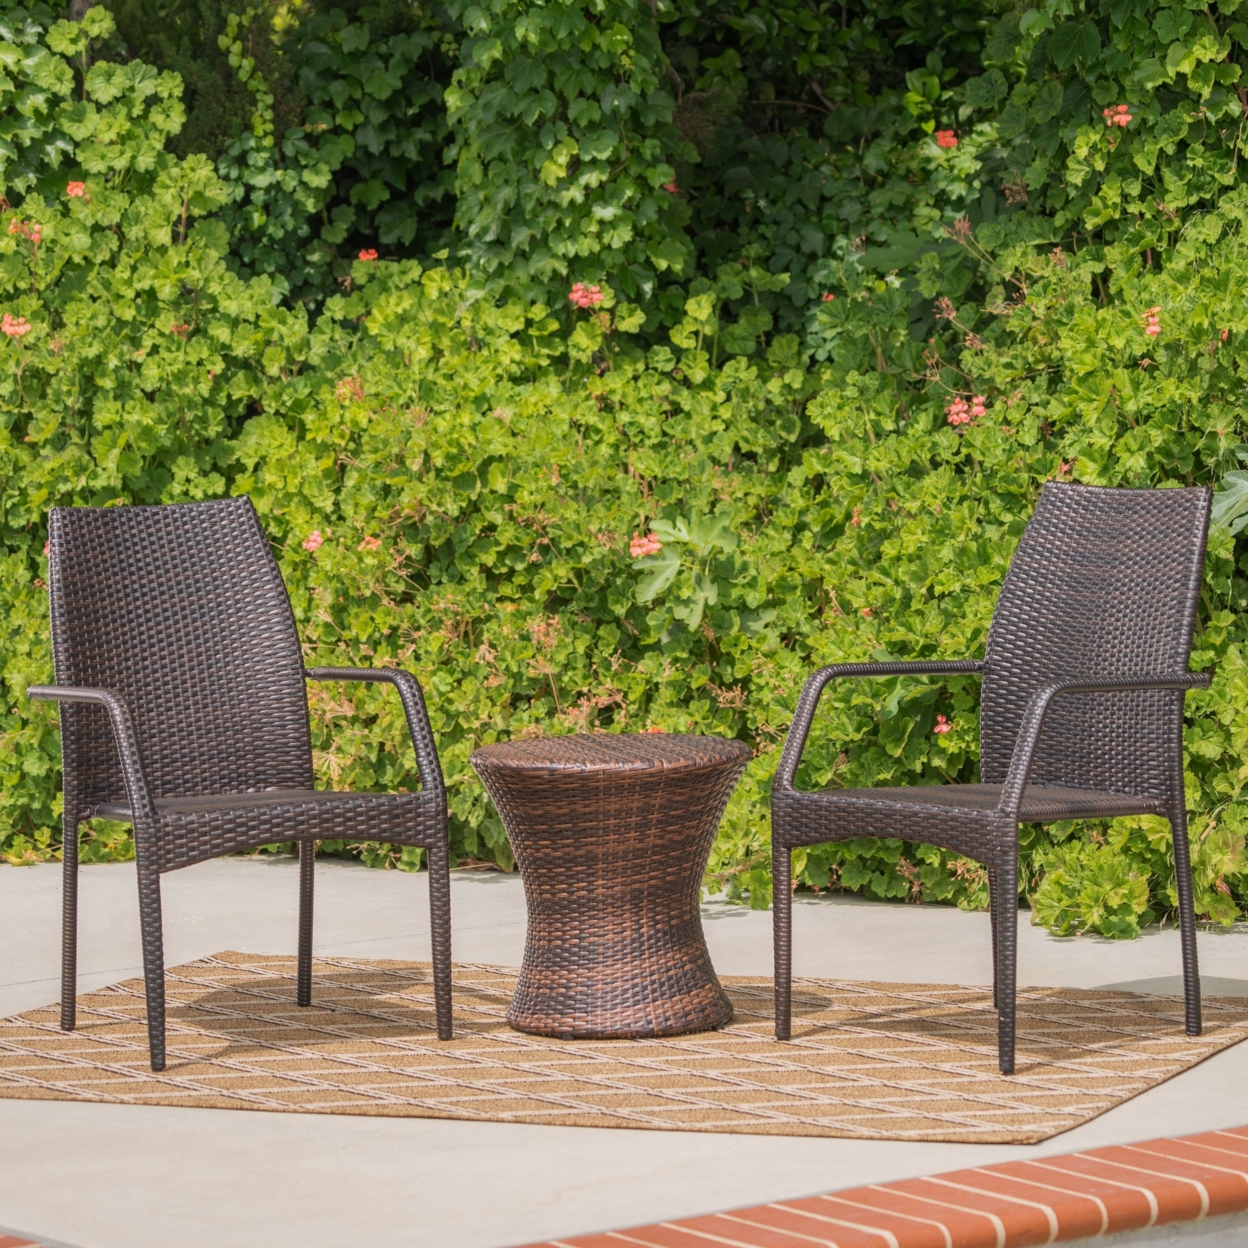 Dawson Outdoor 3 Piece Multi-brown Wicker Stacking Chair Chat Set - Skirted Hour Glass Table, Brown